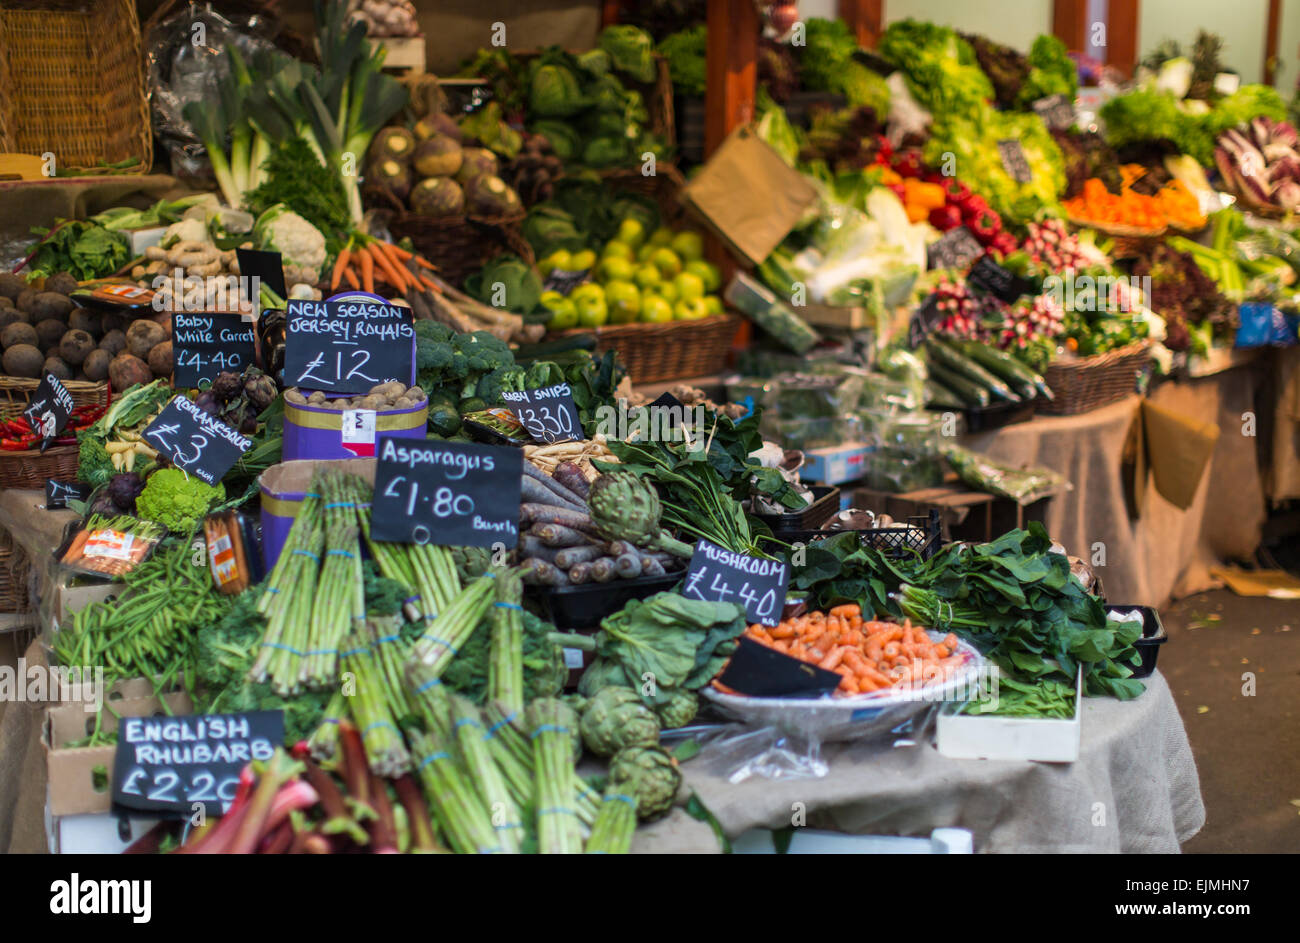 Fruit and vegetables stand, Borough Market, London Stock Photo